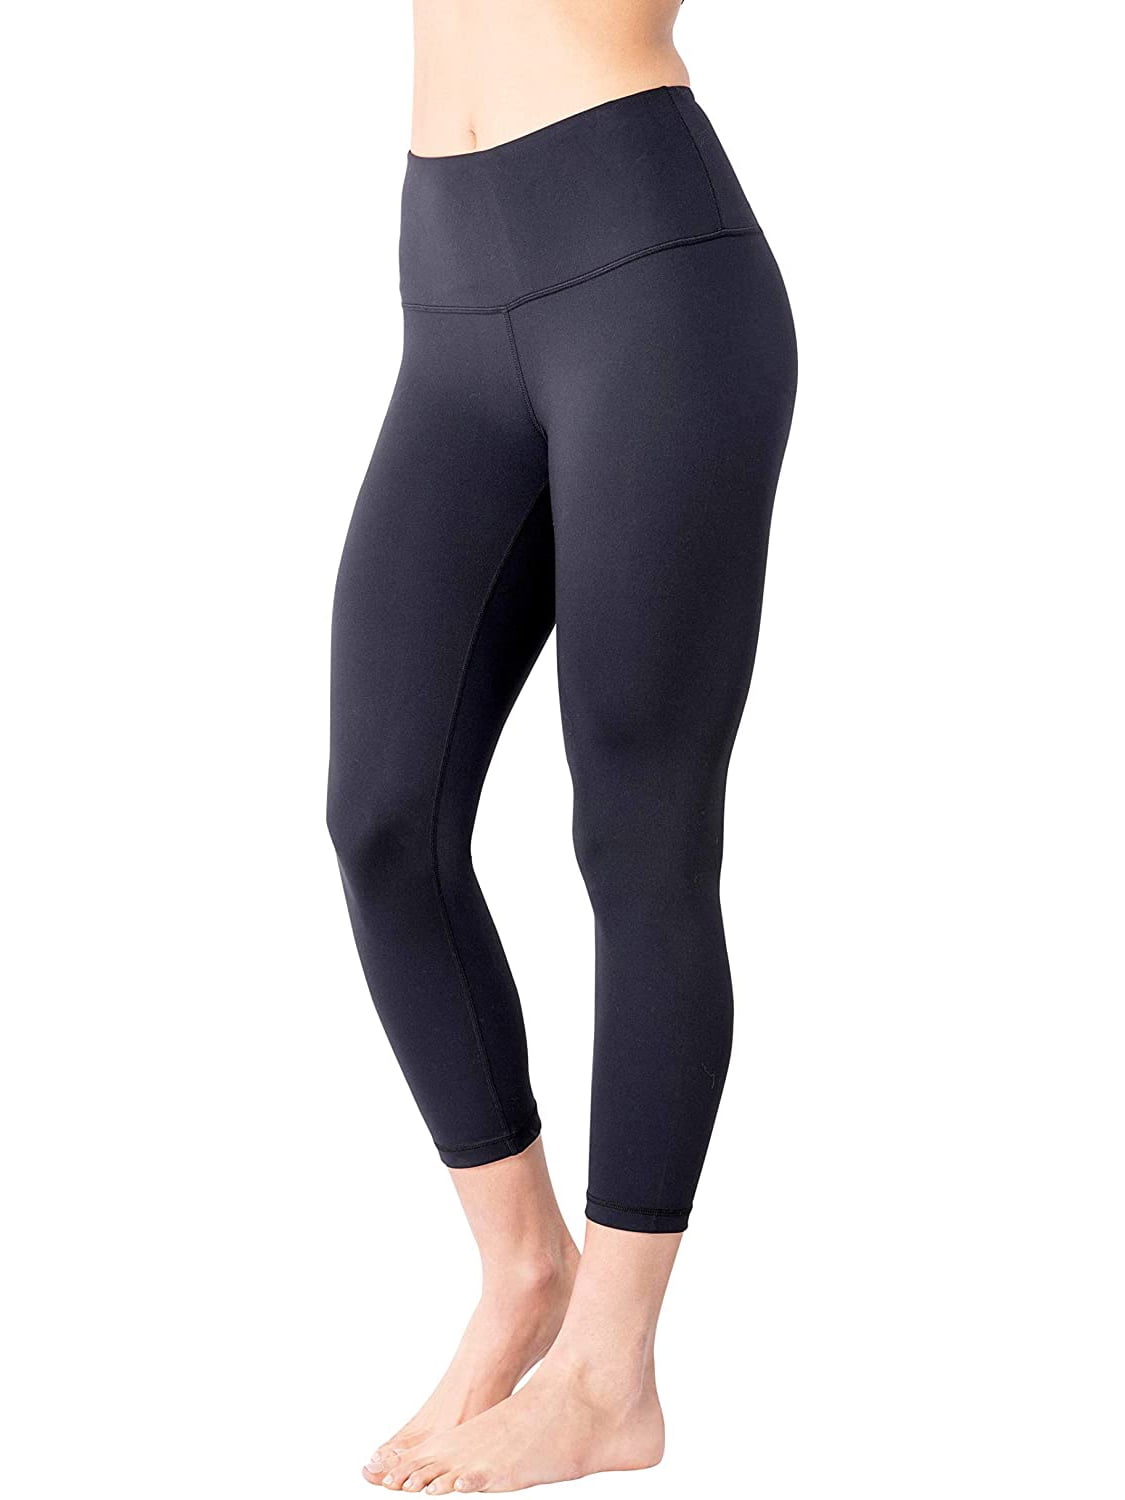 yogalicious tights Cheap Sale - OFF 74%